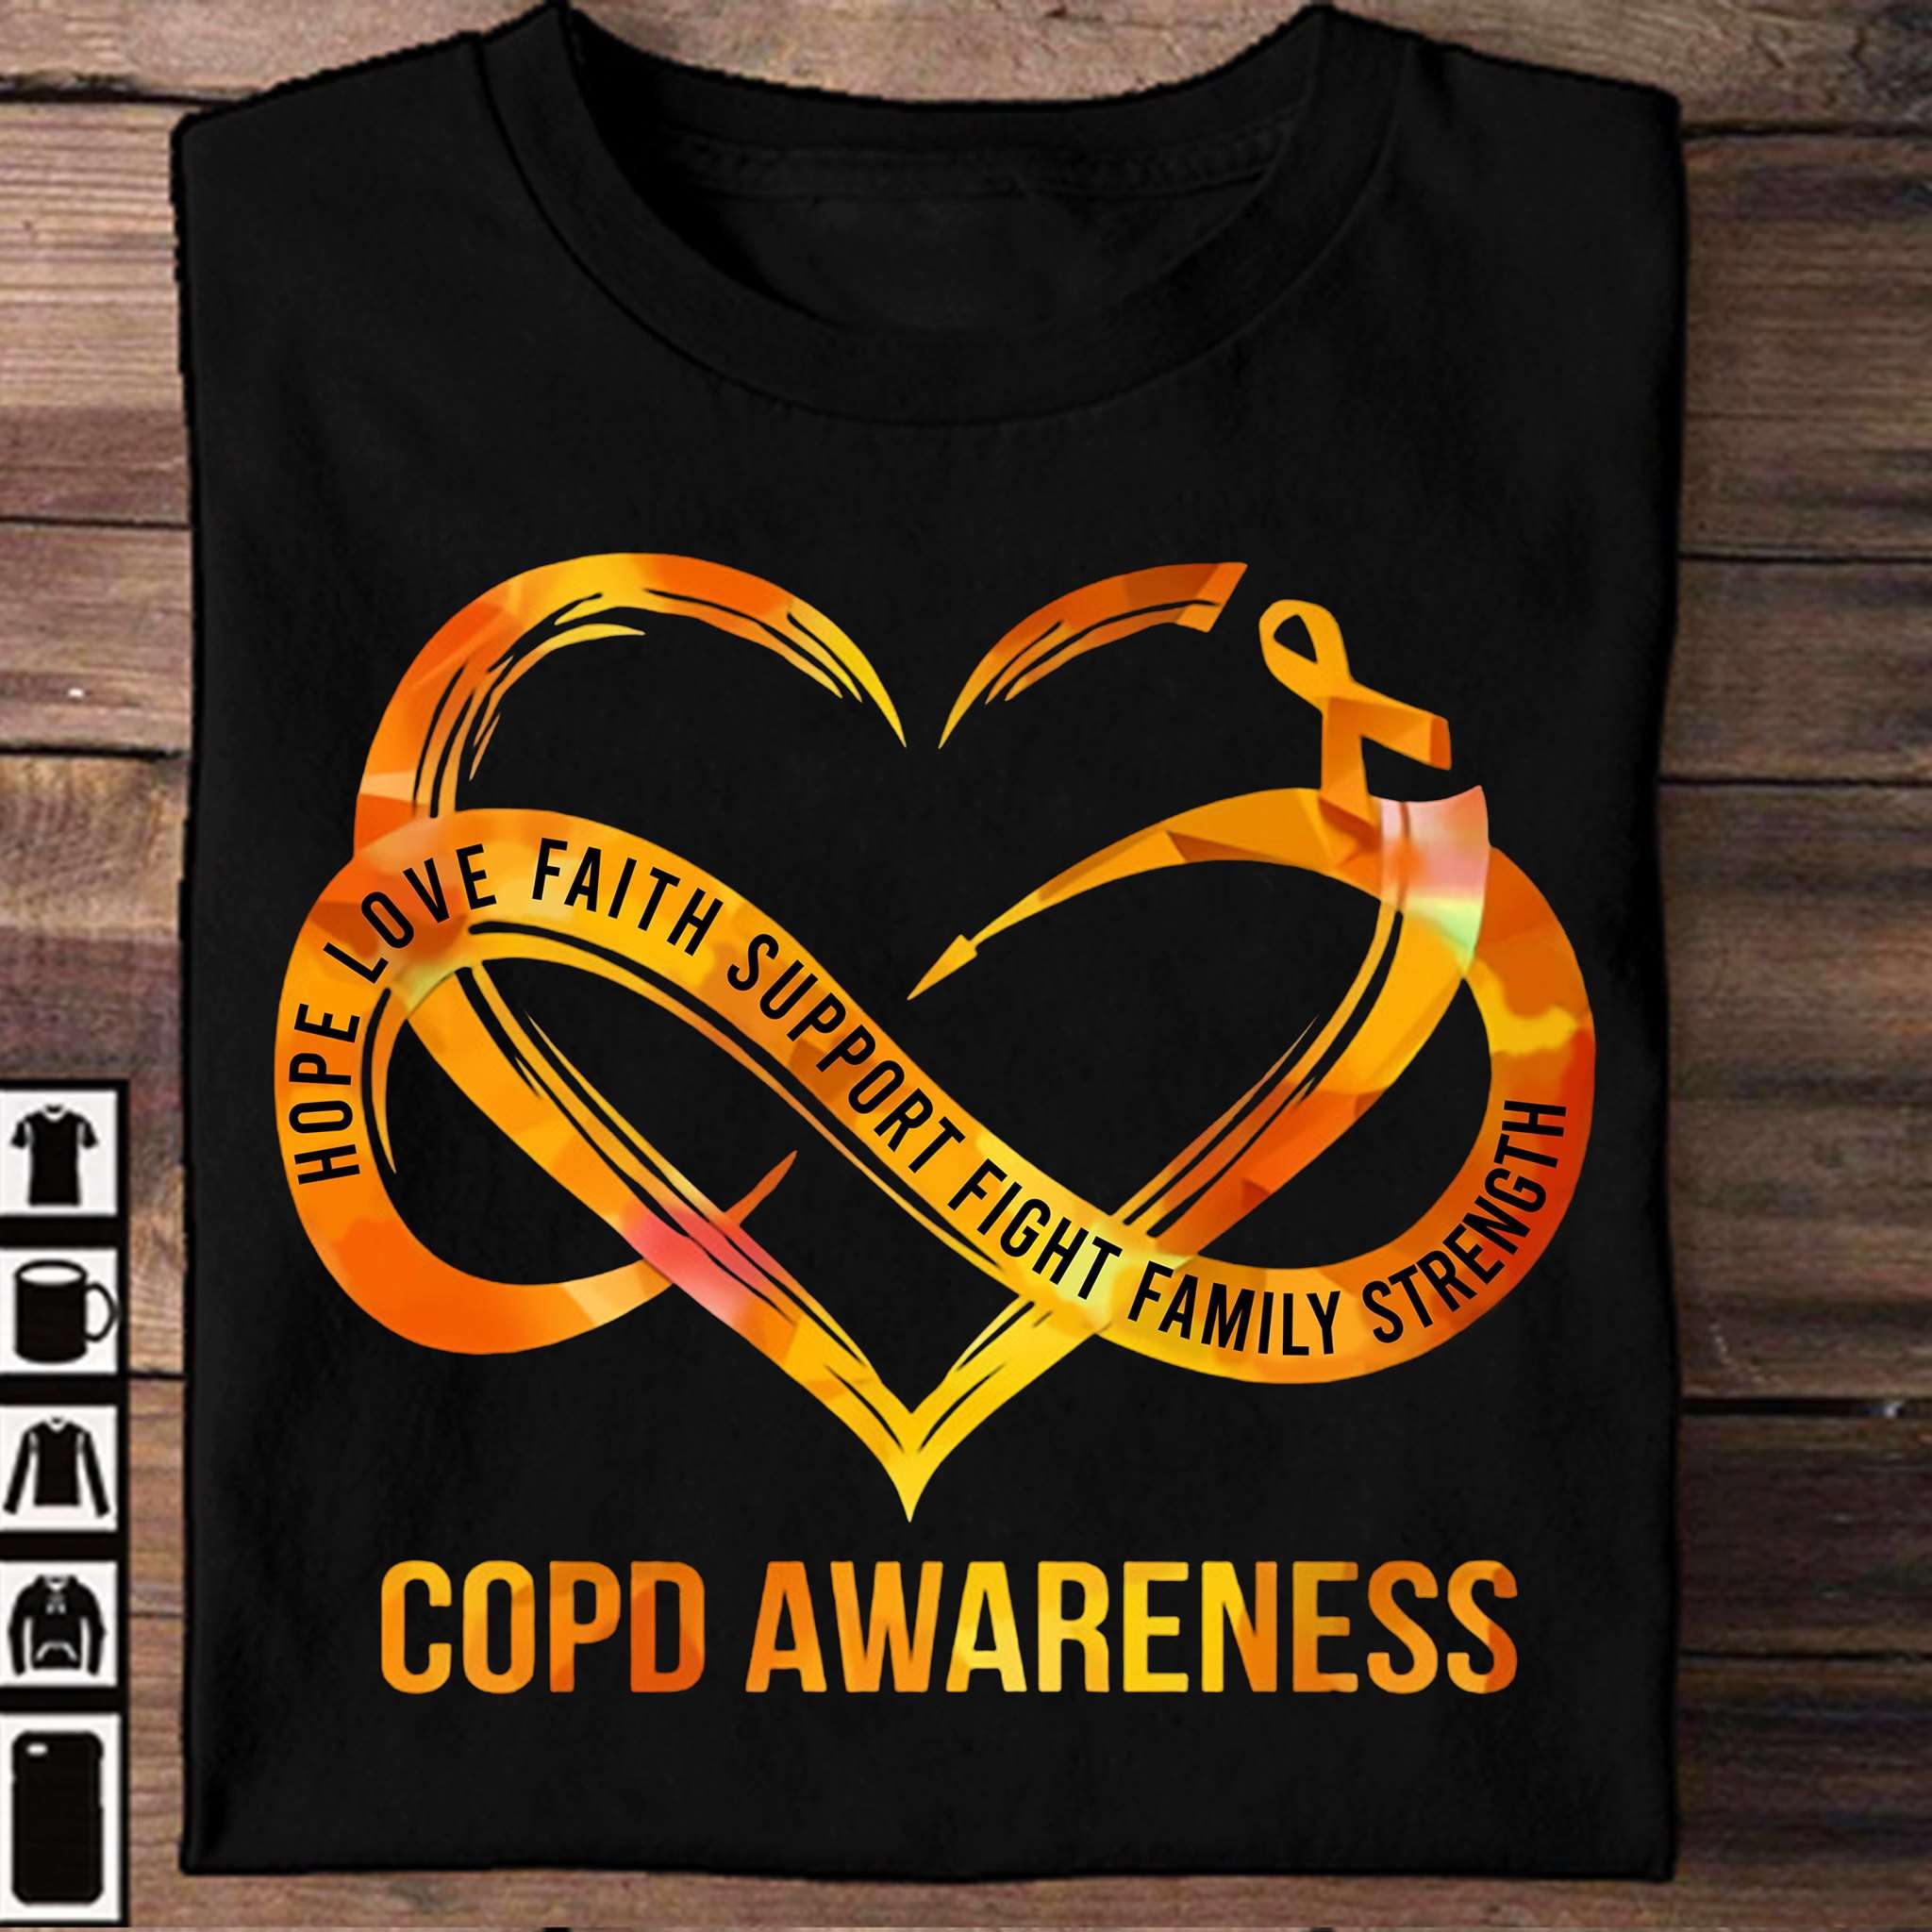 Hope love faith support fight family strength copd awareness